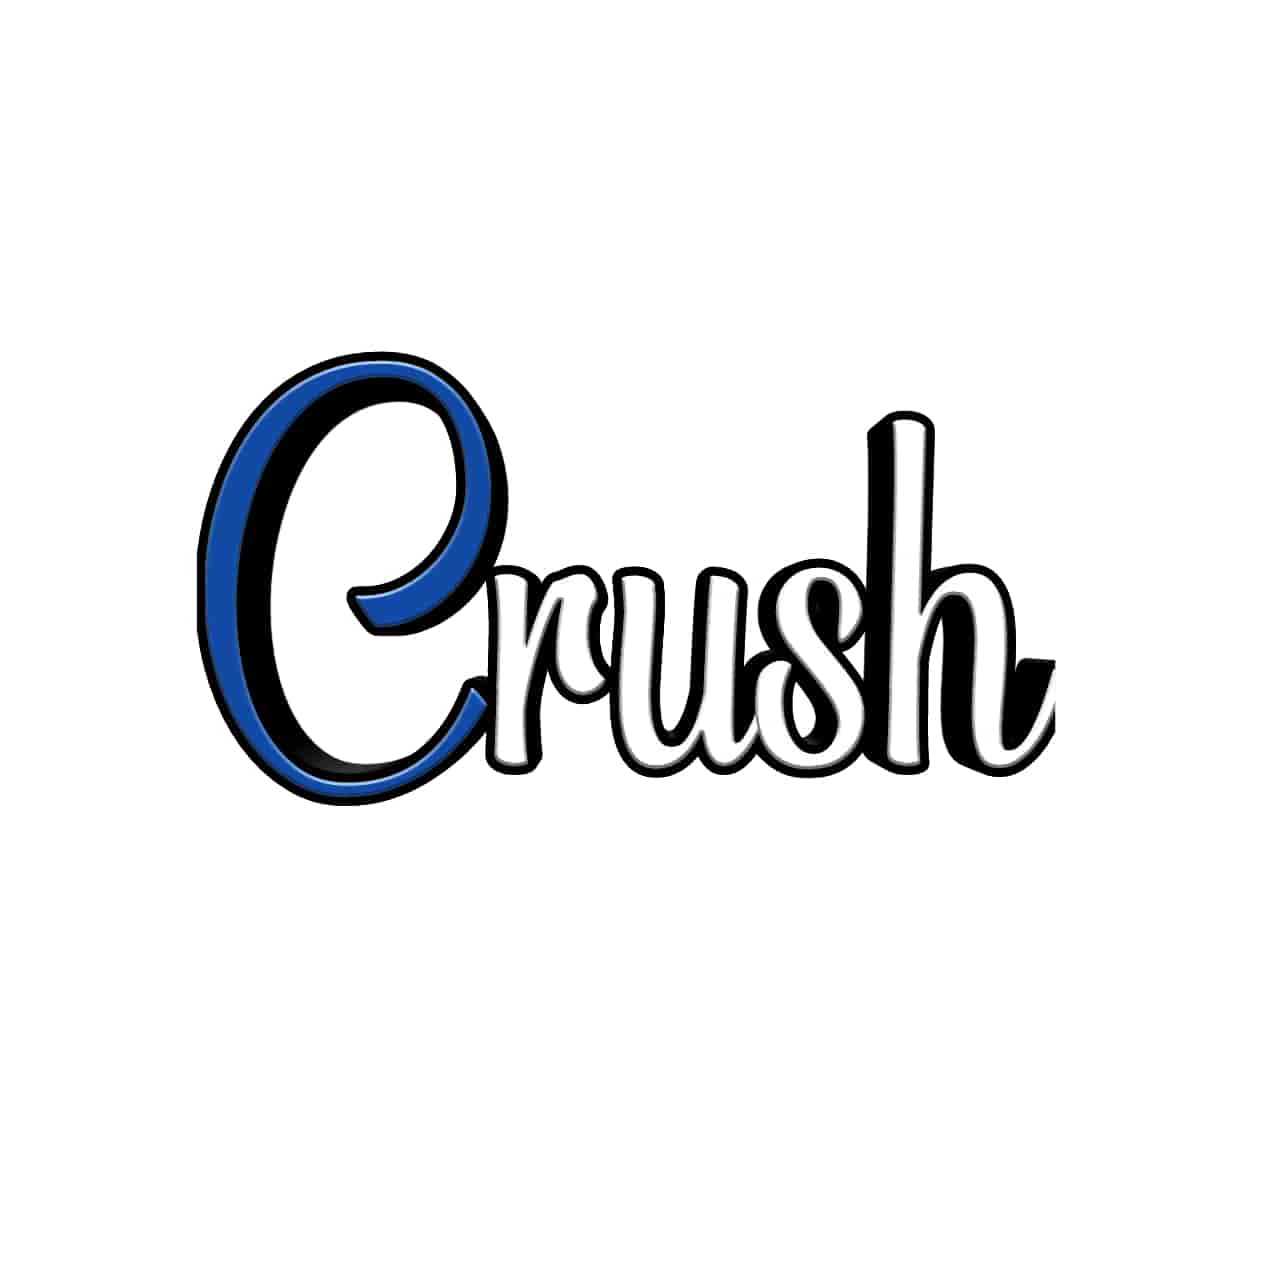 crush png text, crush png image